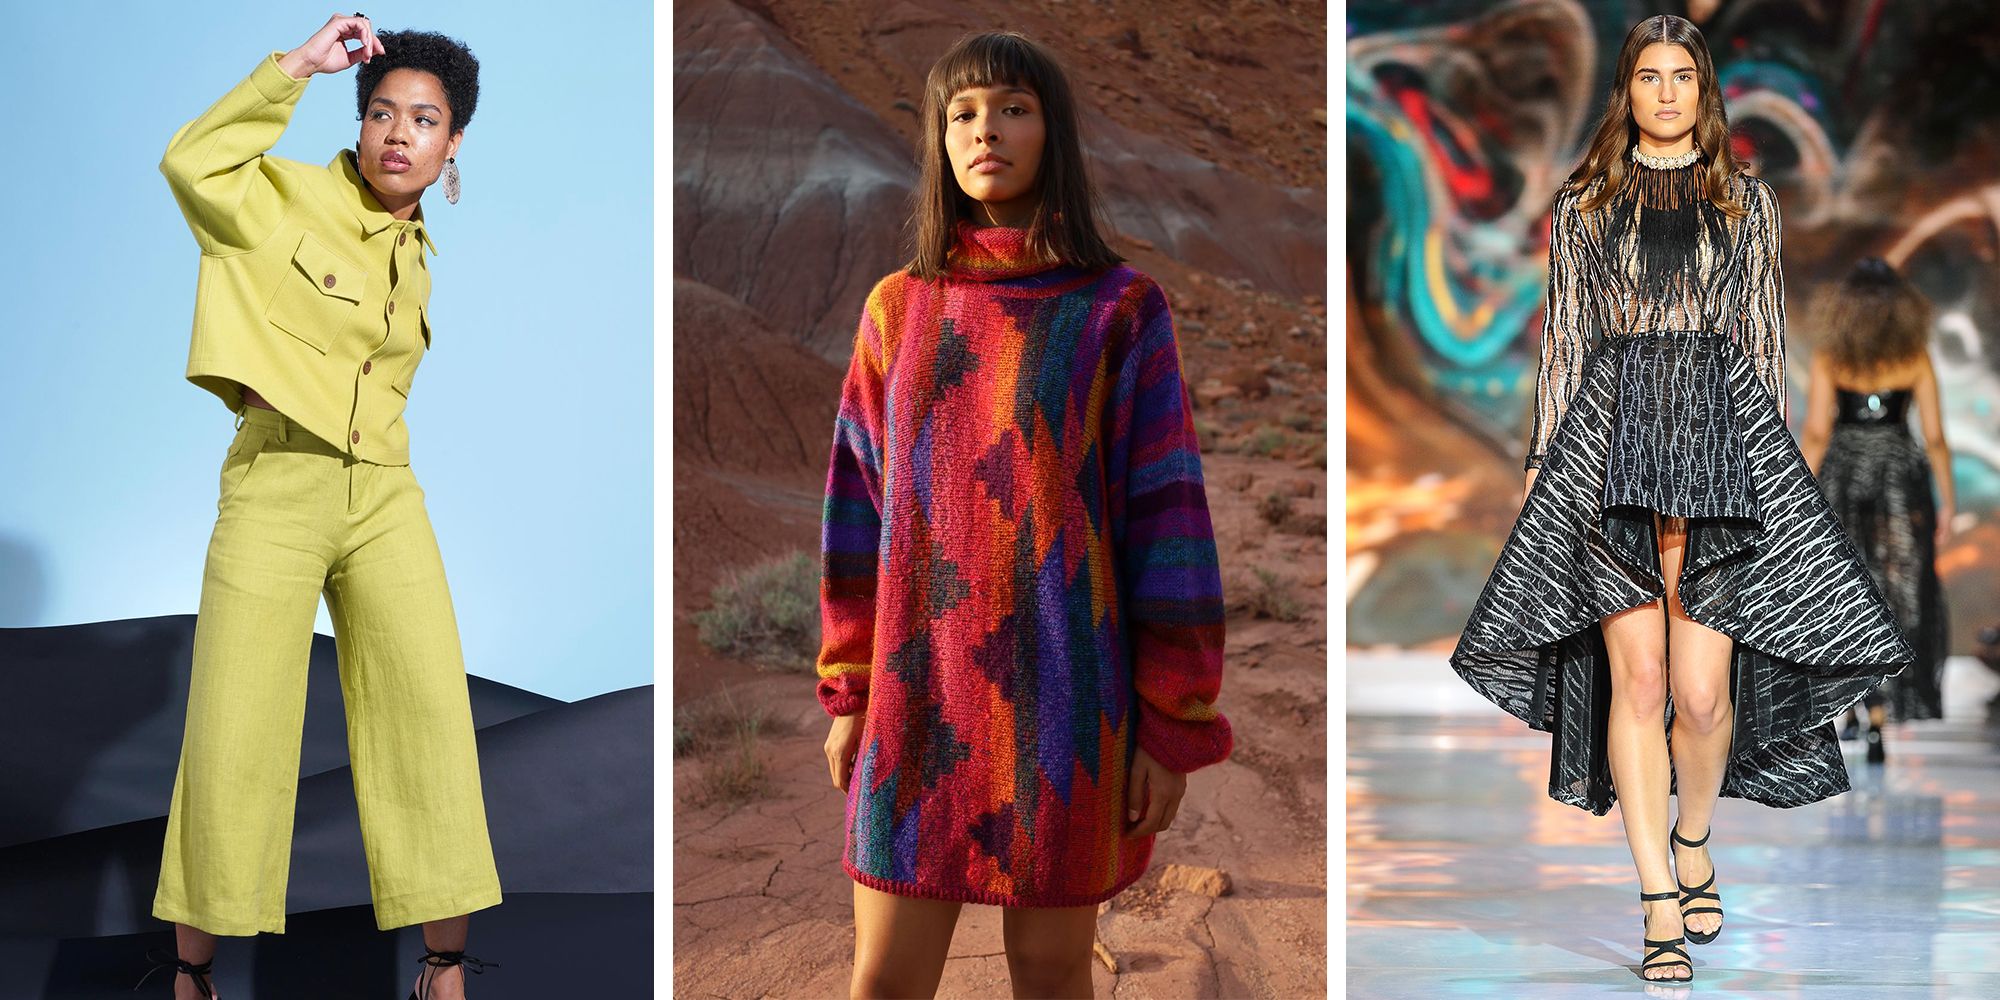 Native American Fashion Designers On Covid-19's Impact and the